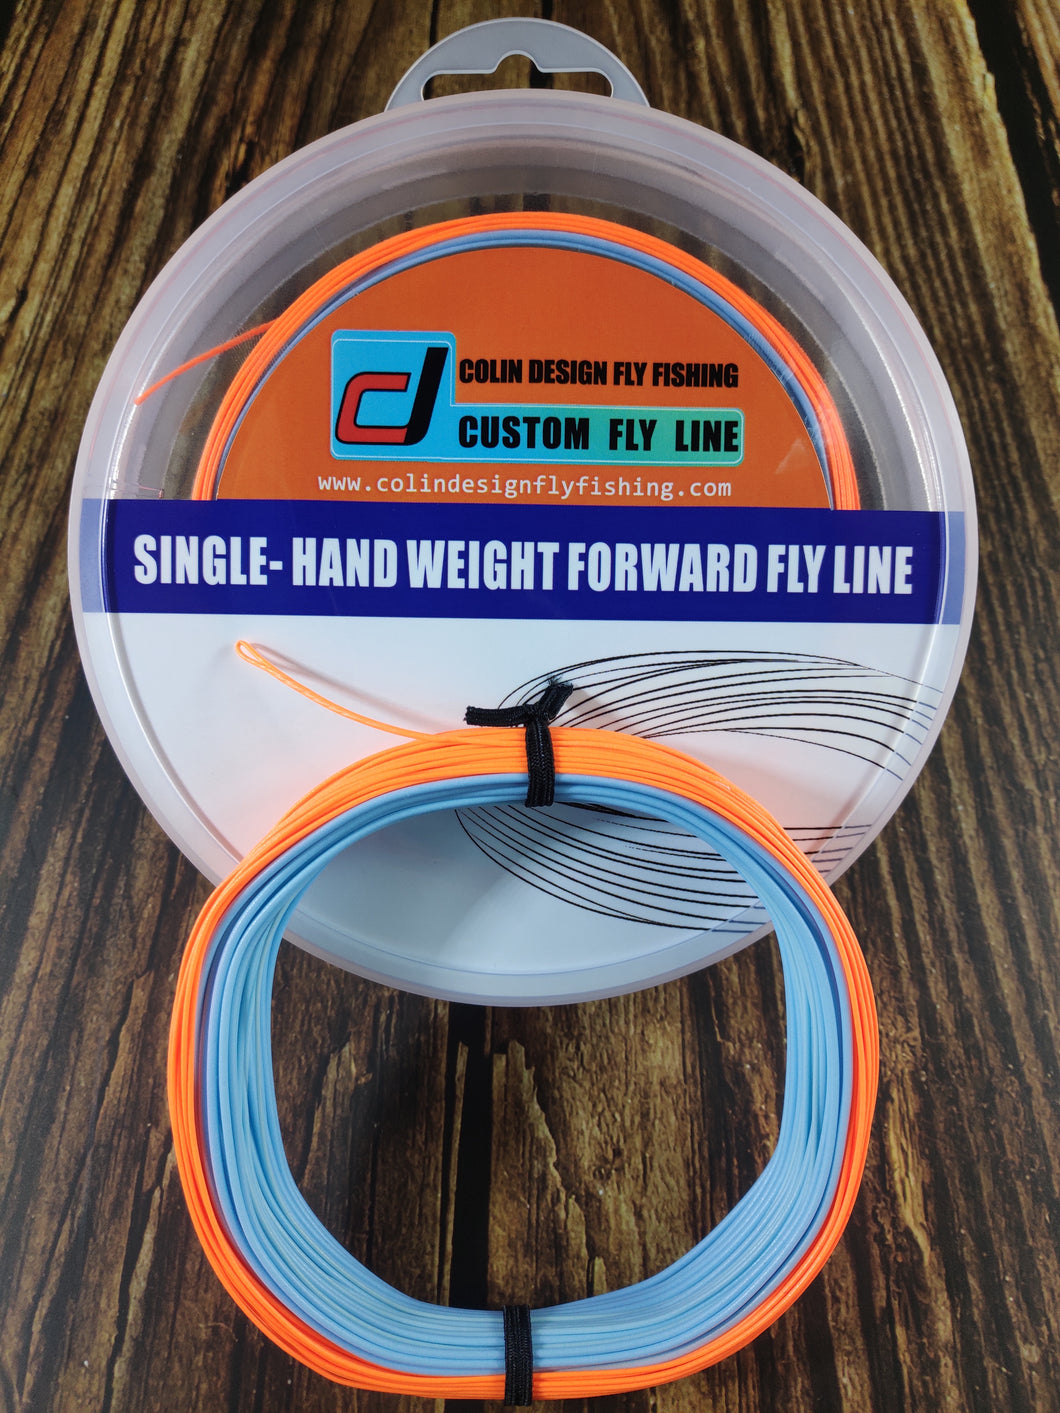 SINGLE HAND WF FLOATING FLY LINE – COLIN Design Fly Fishing